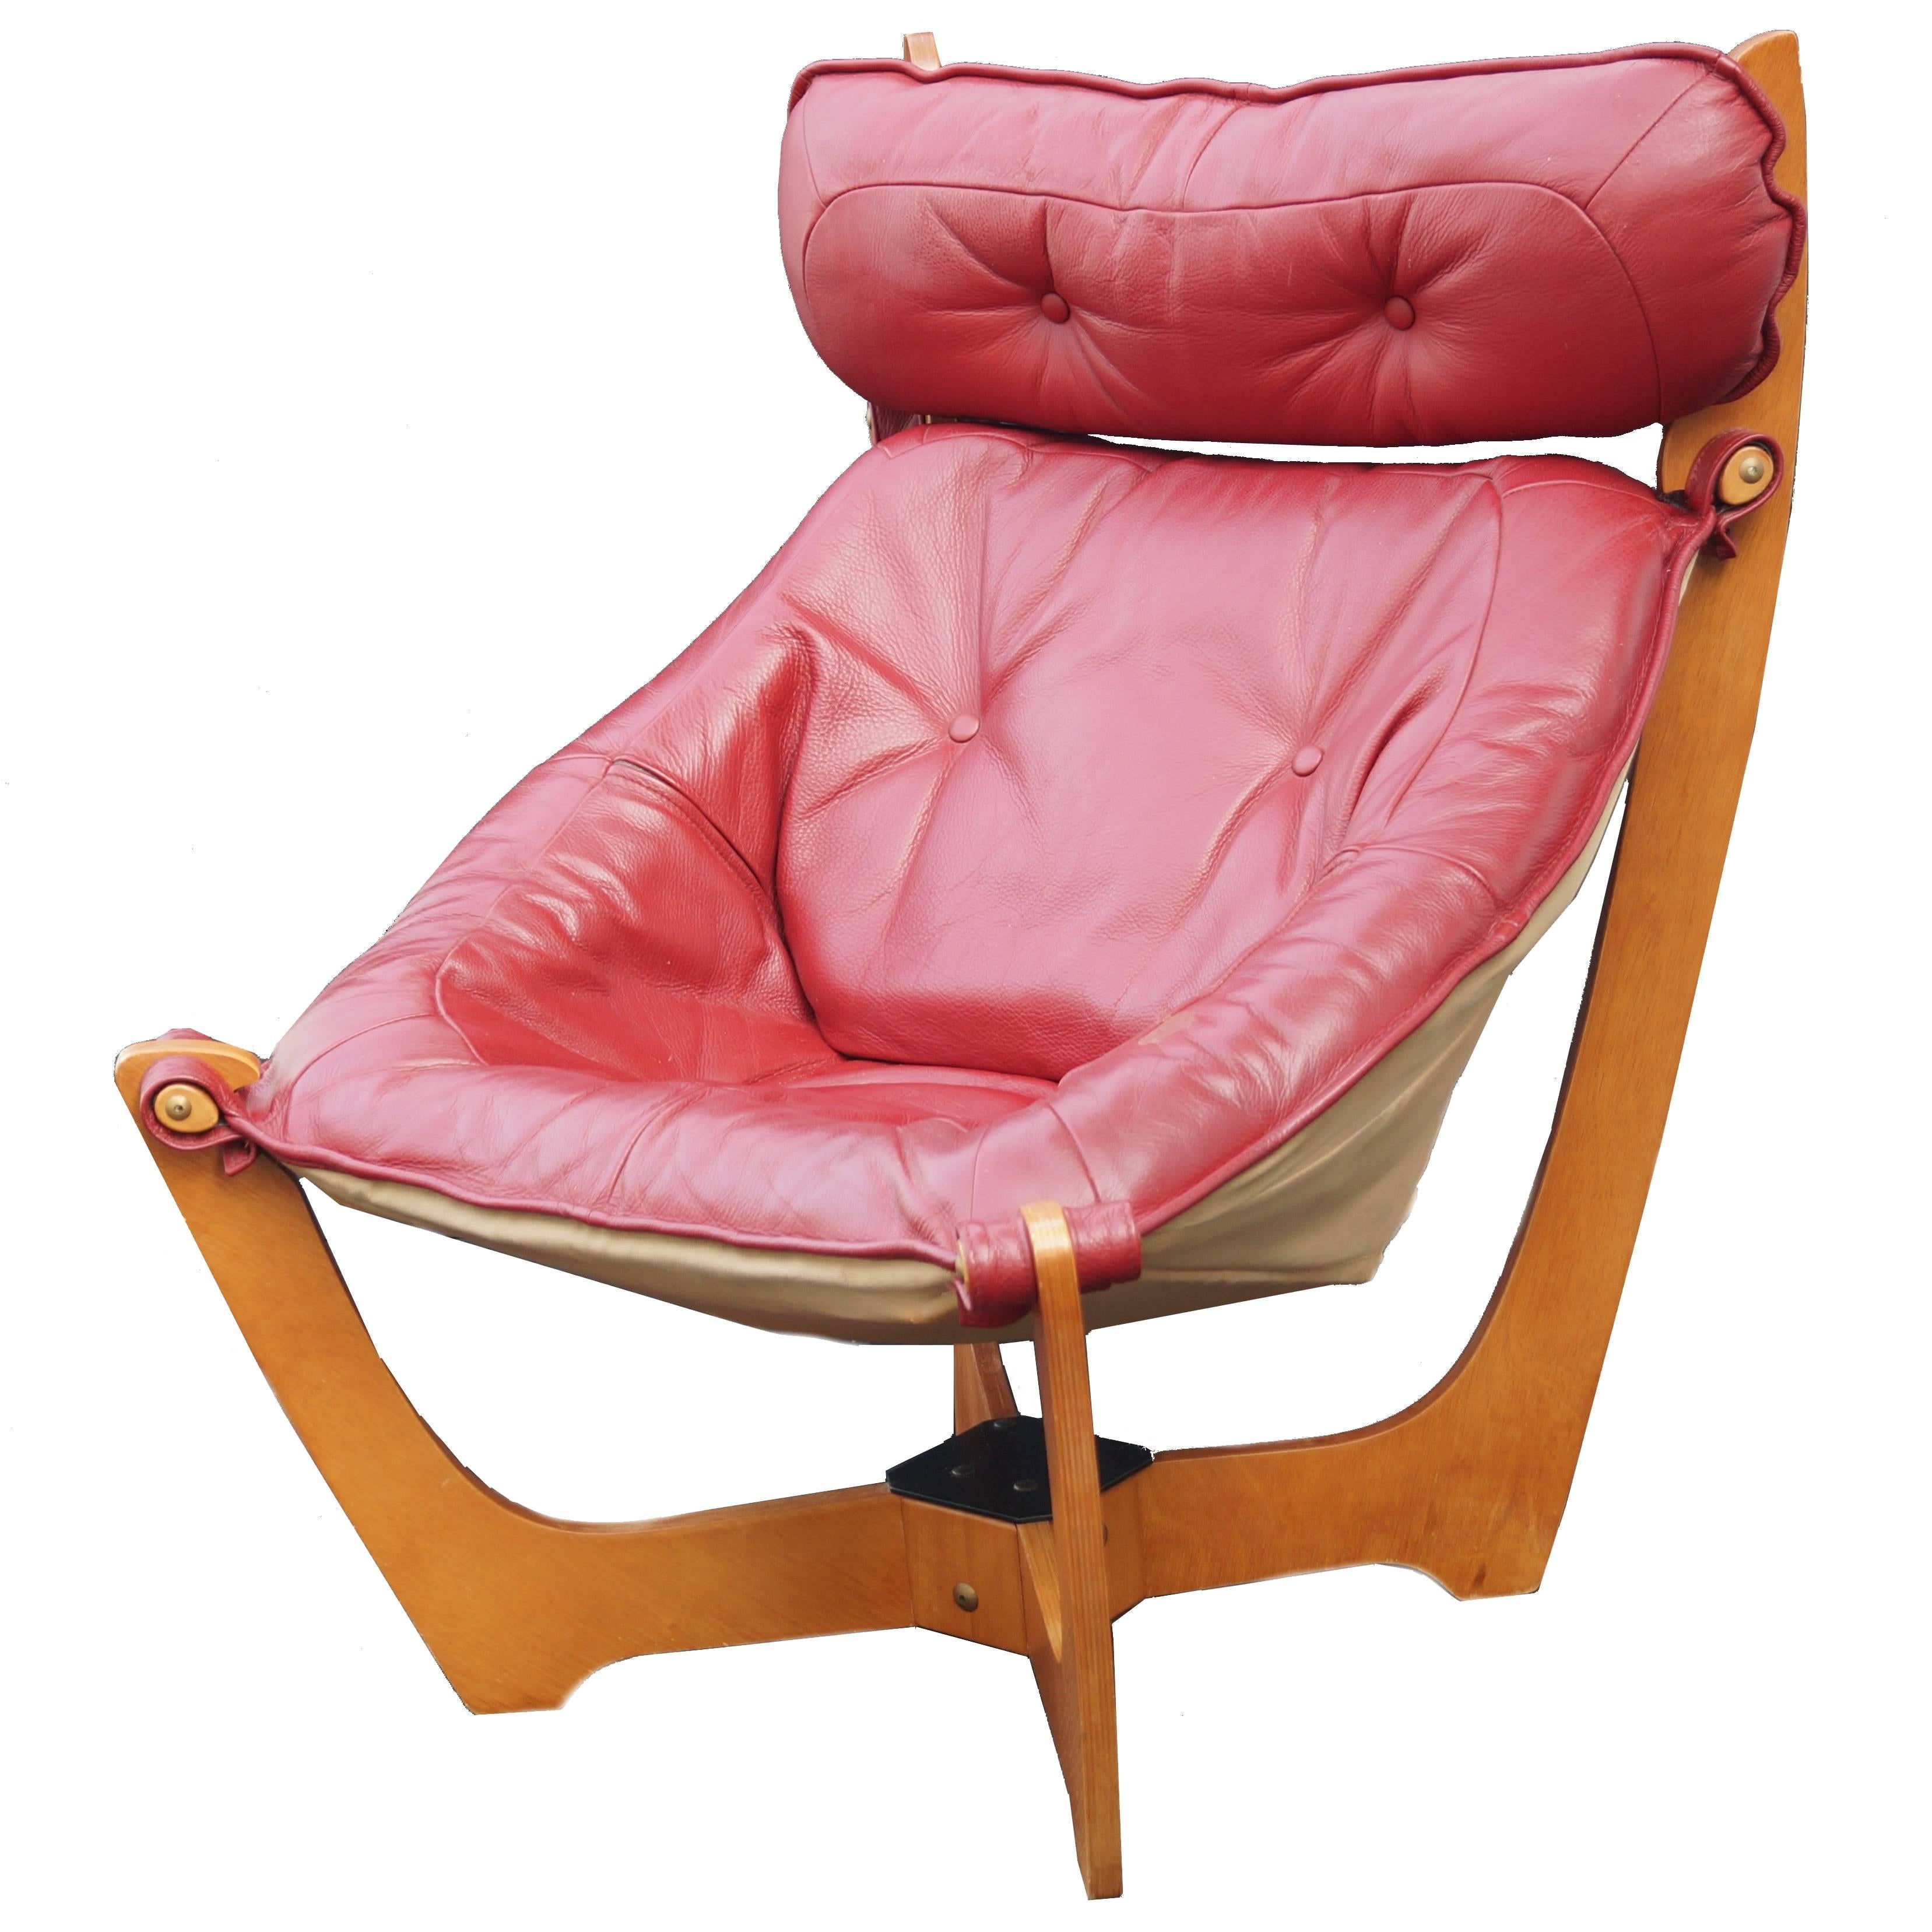 High Back Red Luna Lounge Chair by Odd Knutsen